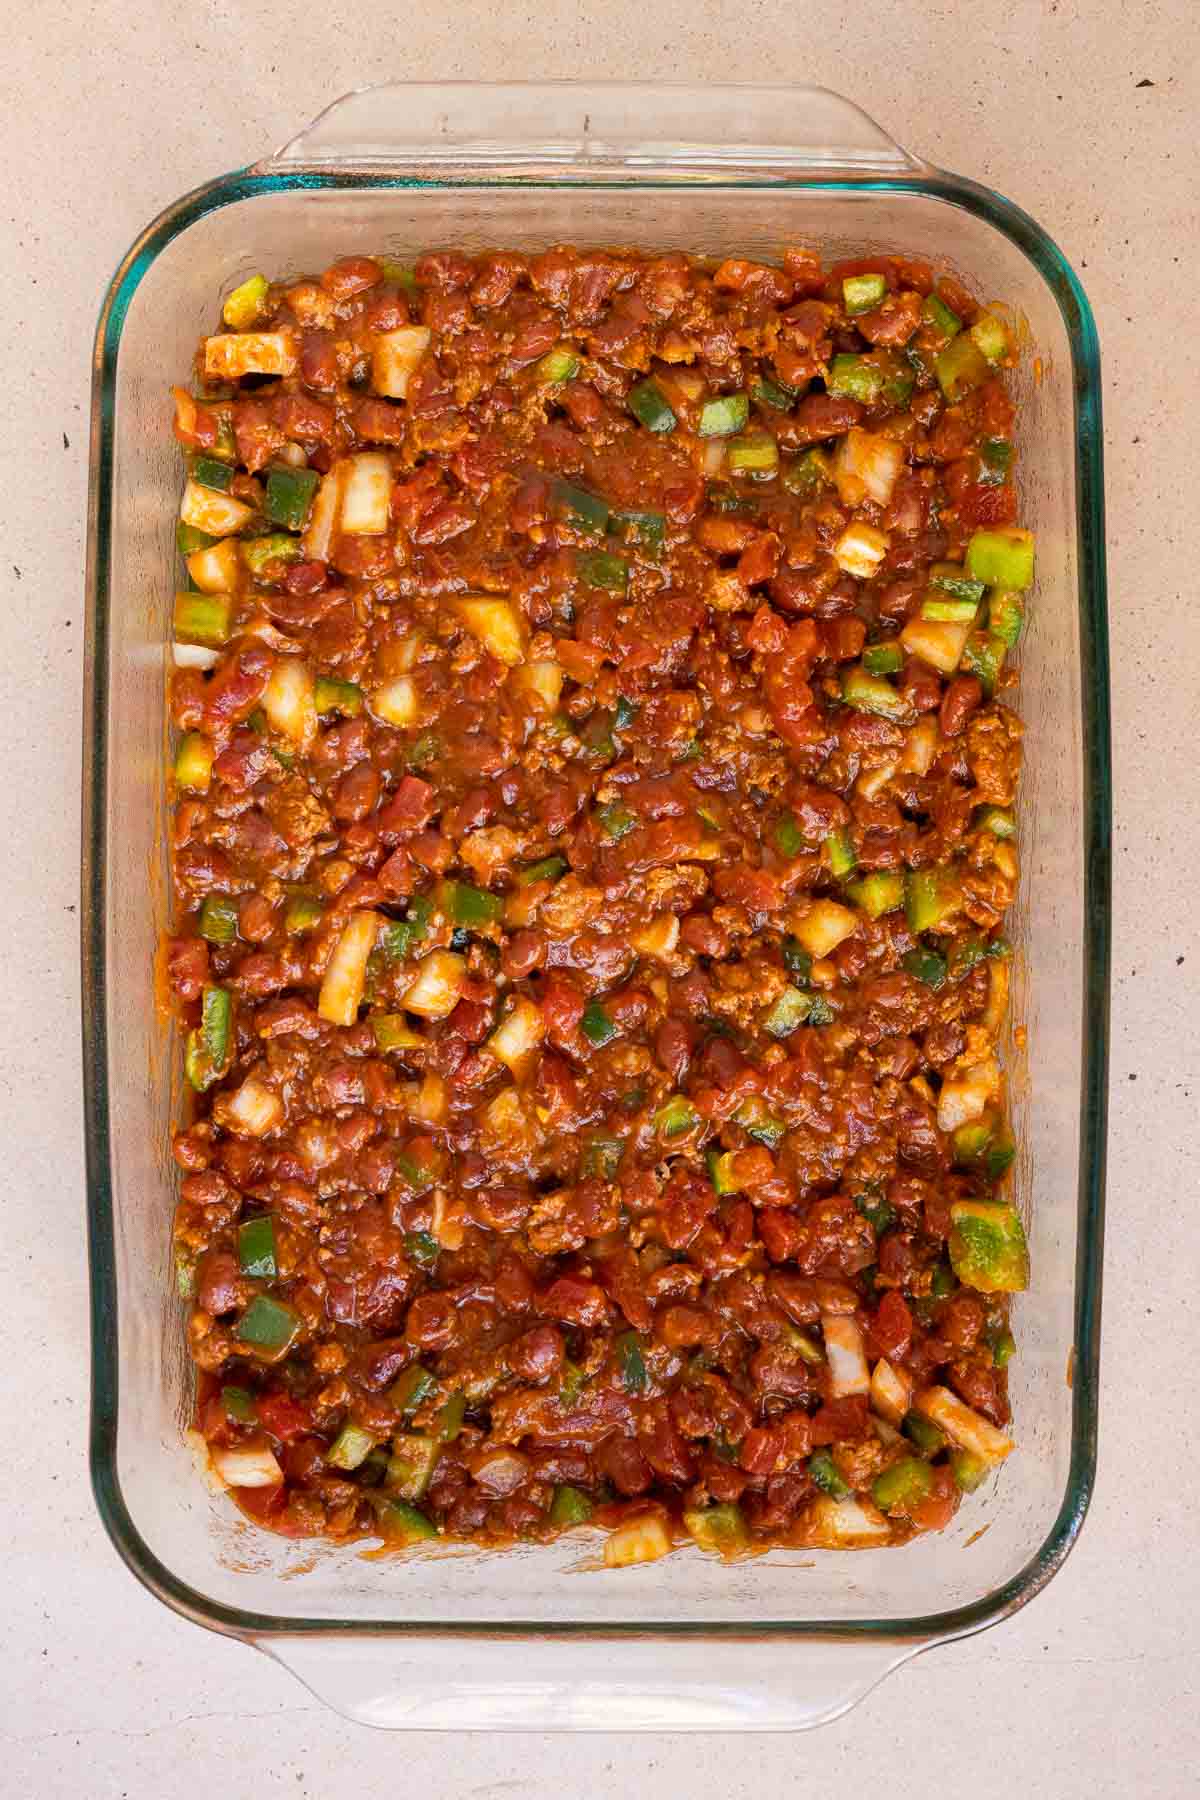 The canned chili and diced veggies are mixed together.